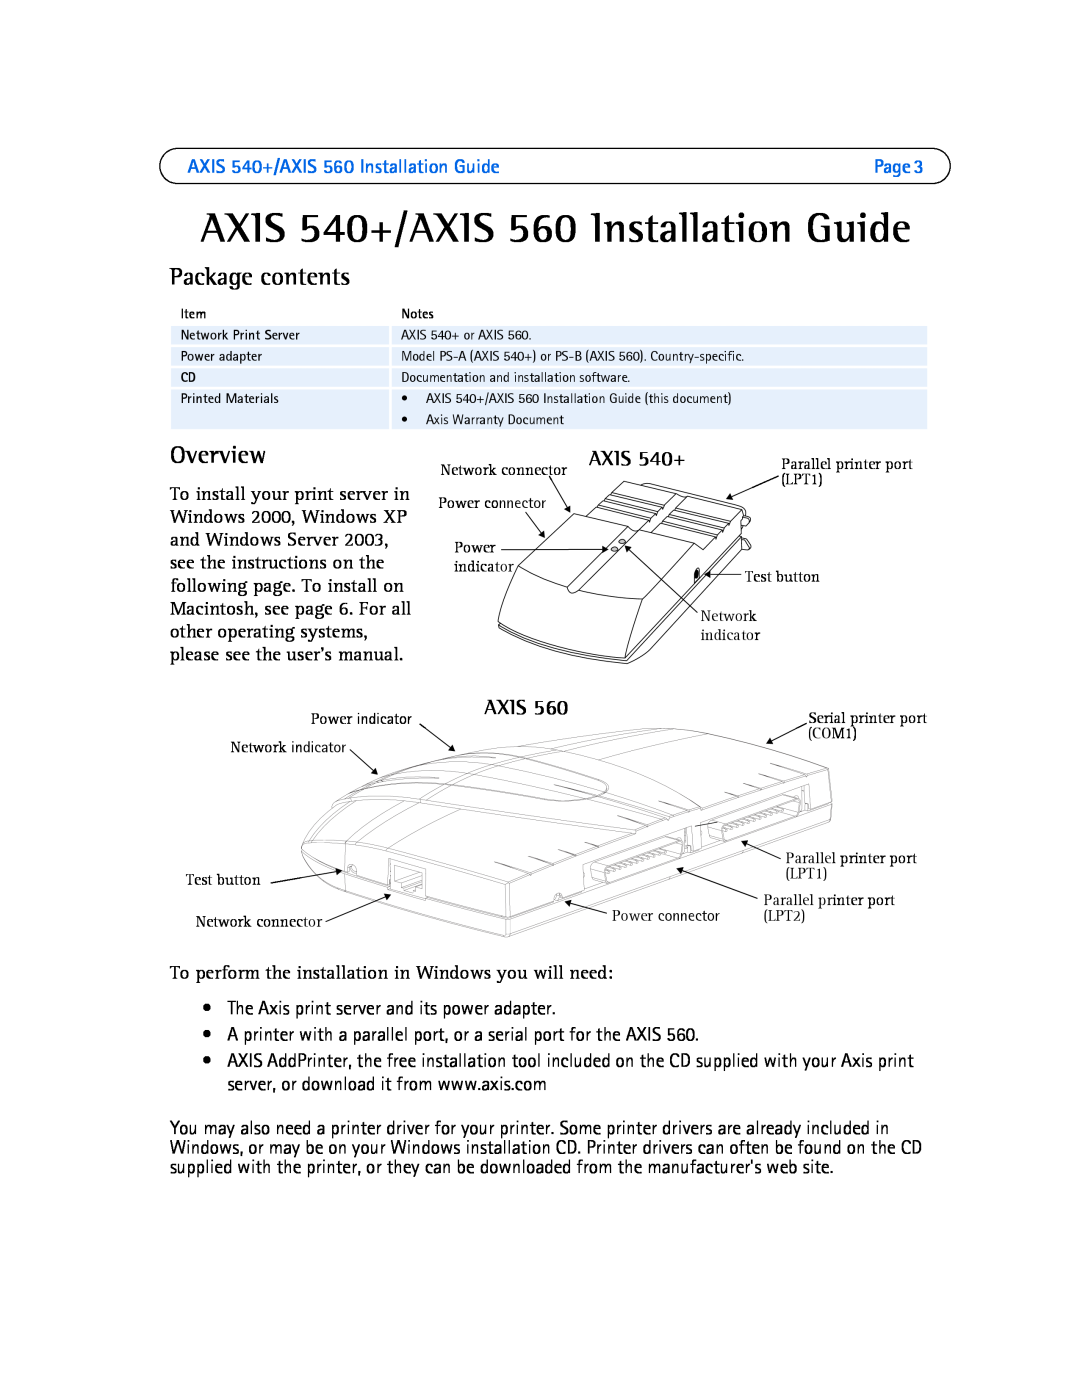 Axis Communications manual AXIS 540+/AXIS 560 Installation Guide, Package contents, Overview, Axis 